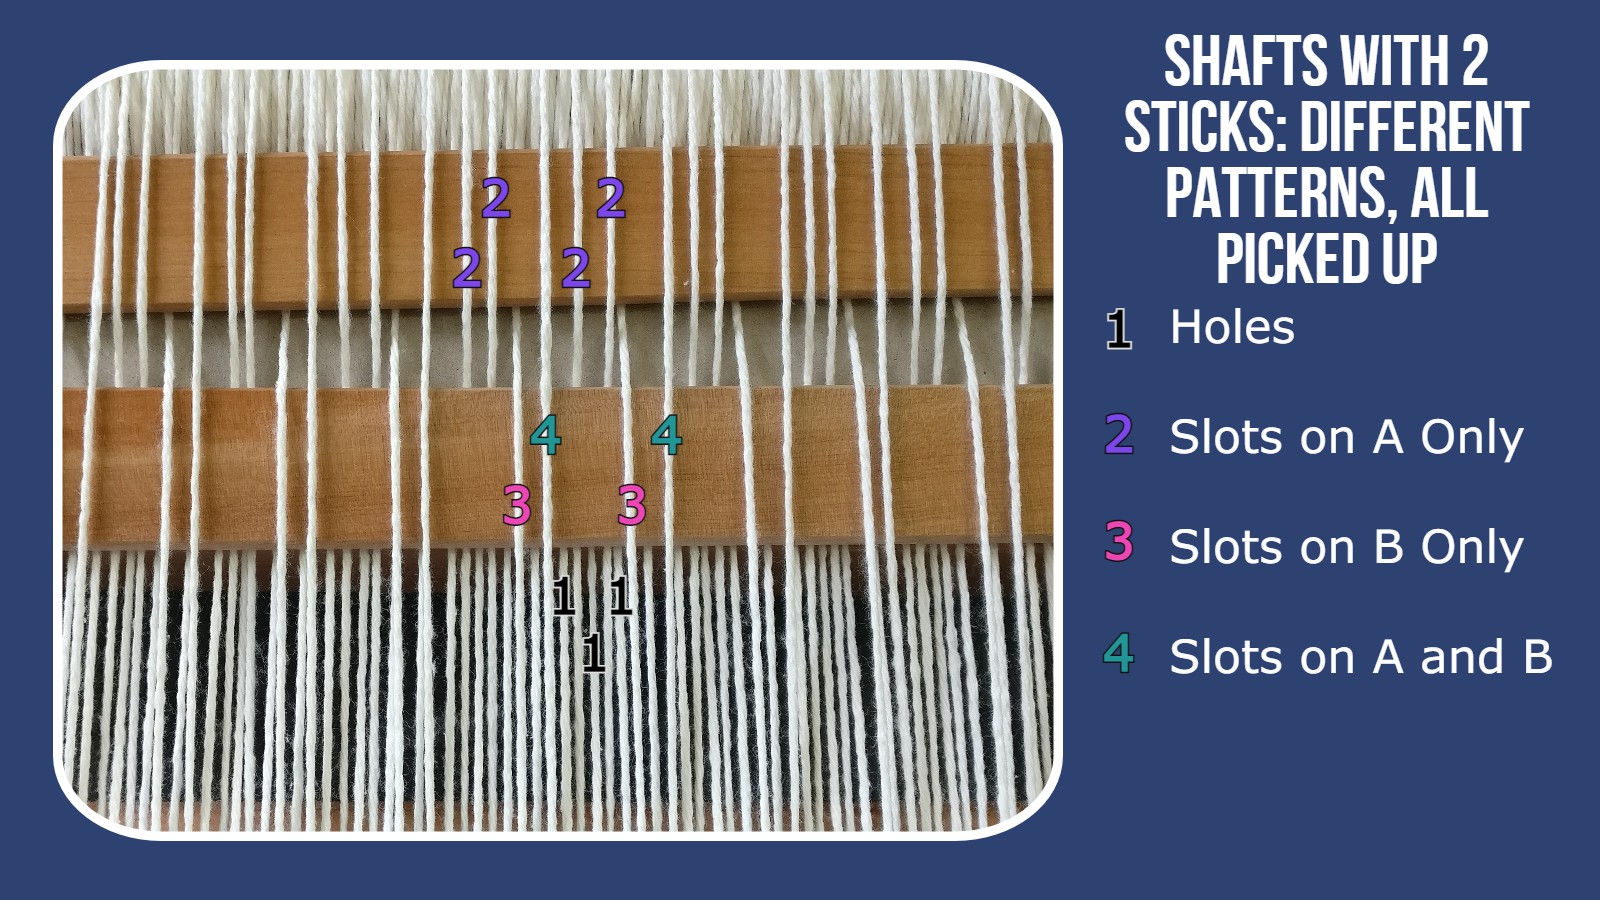 2 stick pick up to shaft illustration: different patterns where all yarns are picked up